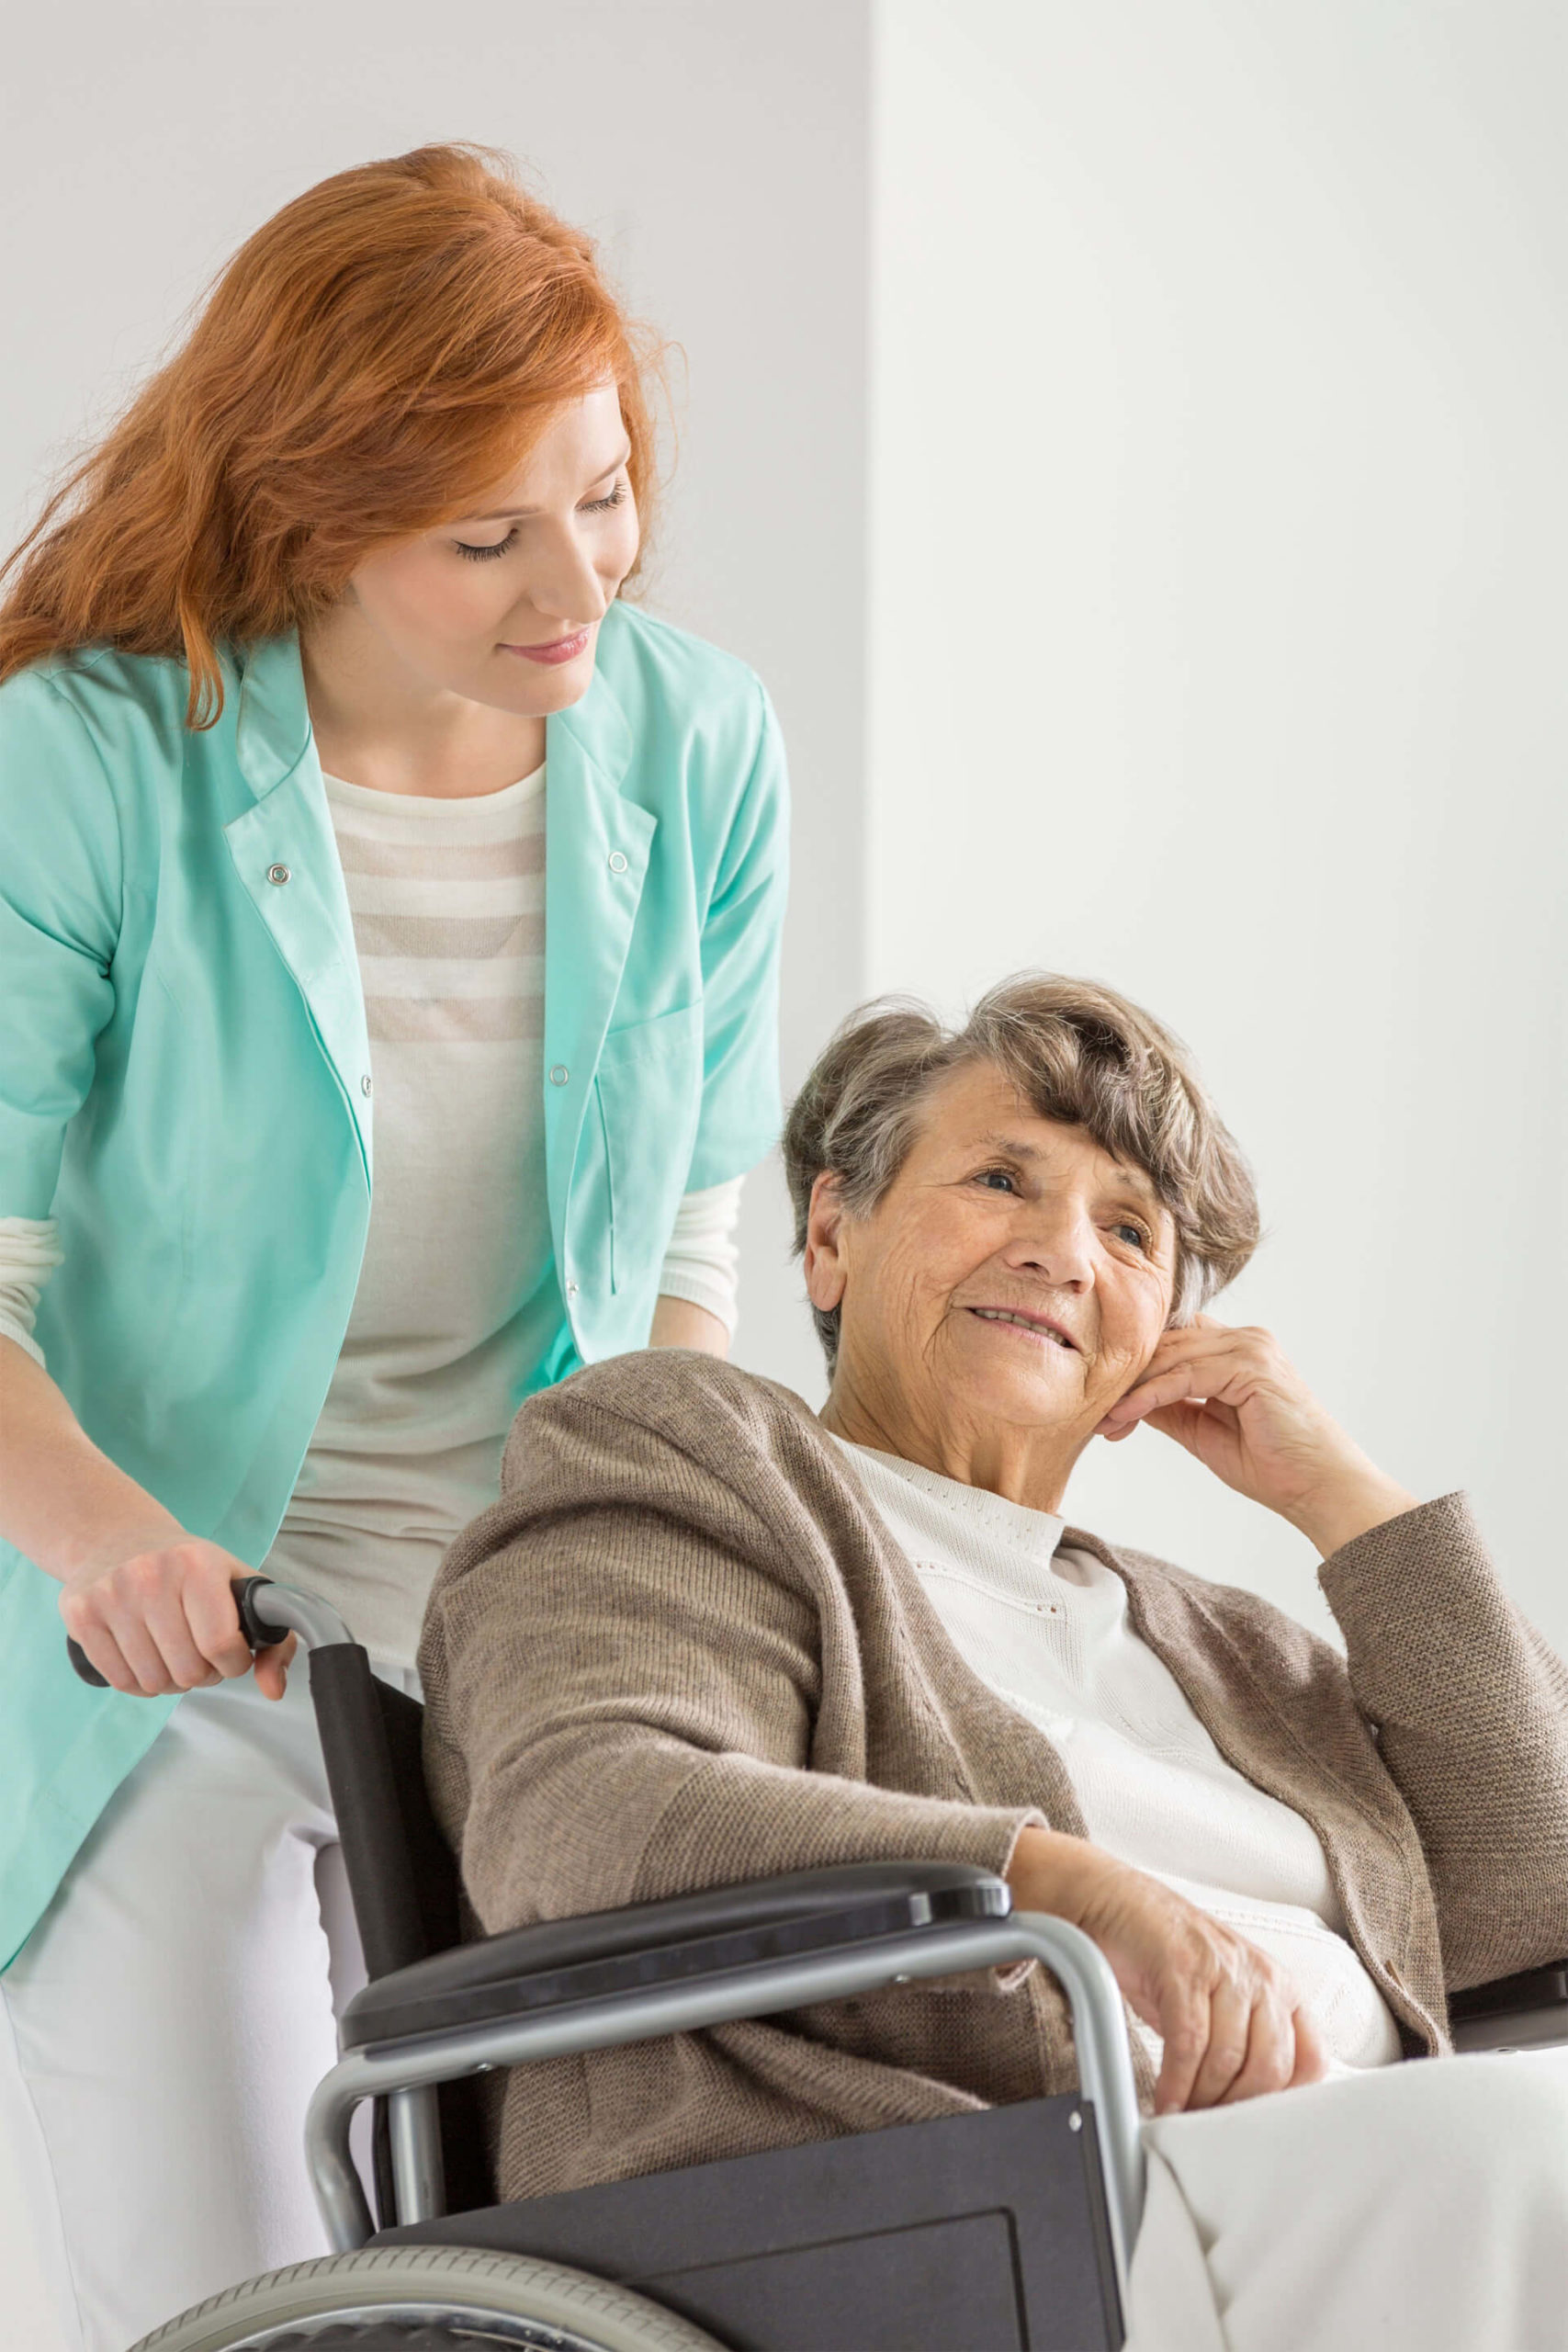 Apply for PCA and HHA home care jobs with Caring Professionals